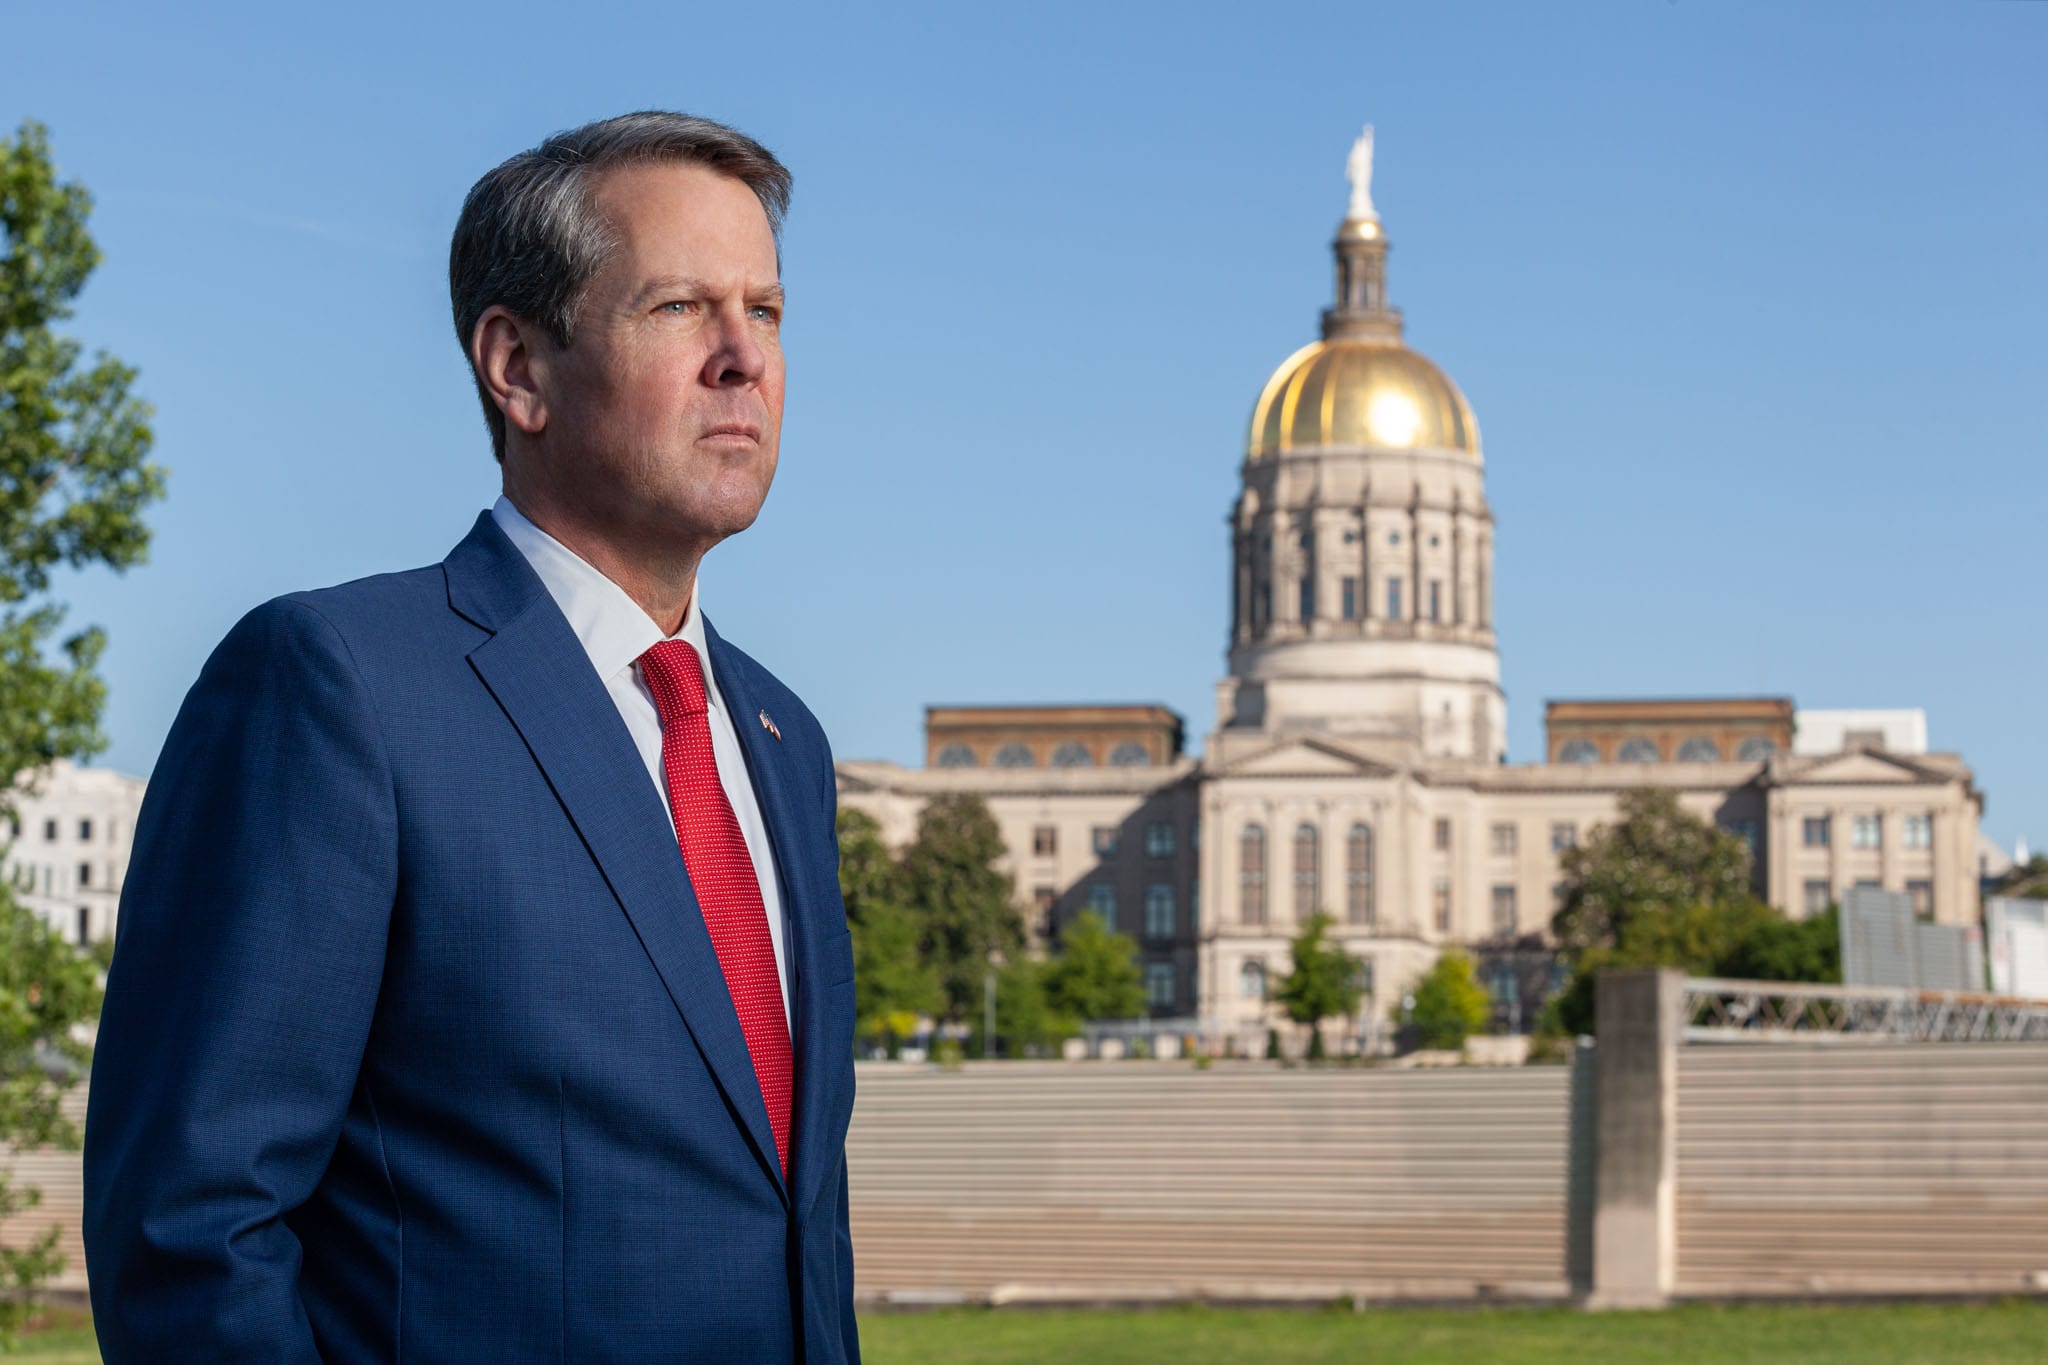 Georgia-Governor-Brian-Kemp-staring-sternly-in-front-of-the-Georgia-State-Capitol.